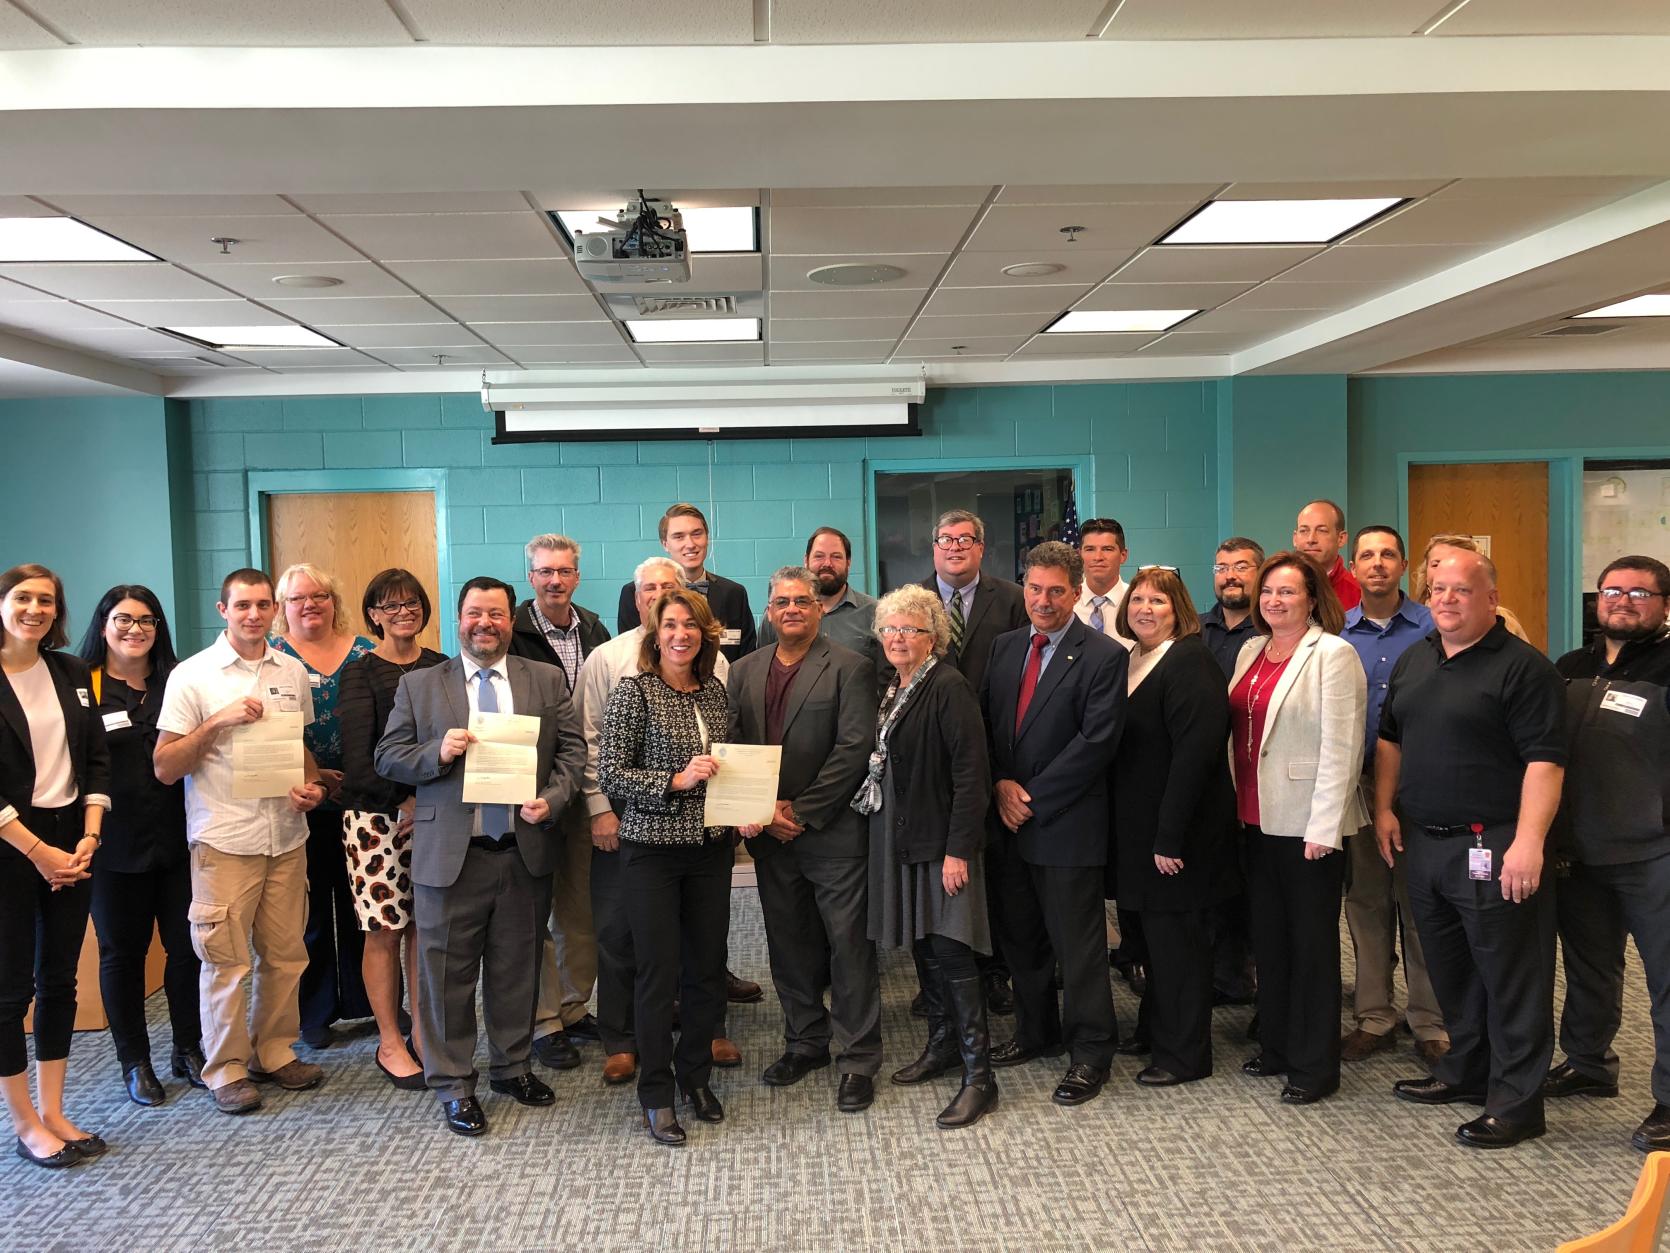 Lt. Governor Polito with Community Compact IT Grant award winners.